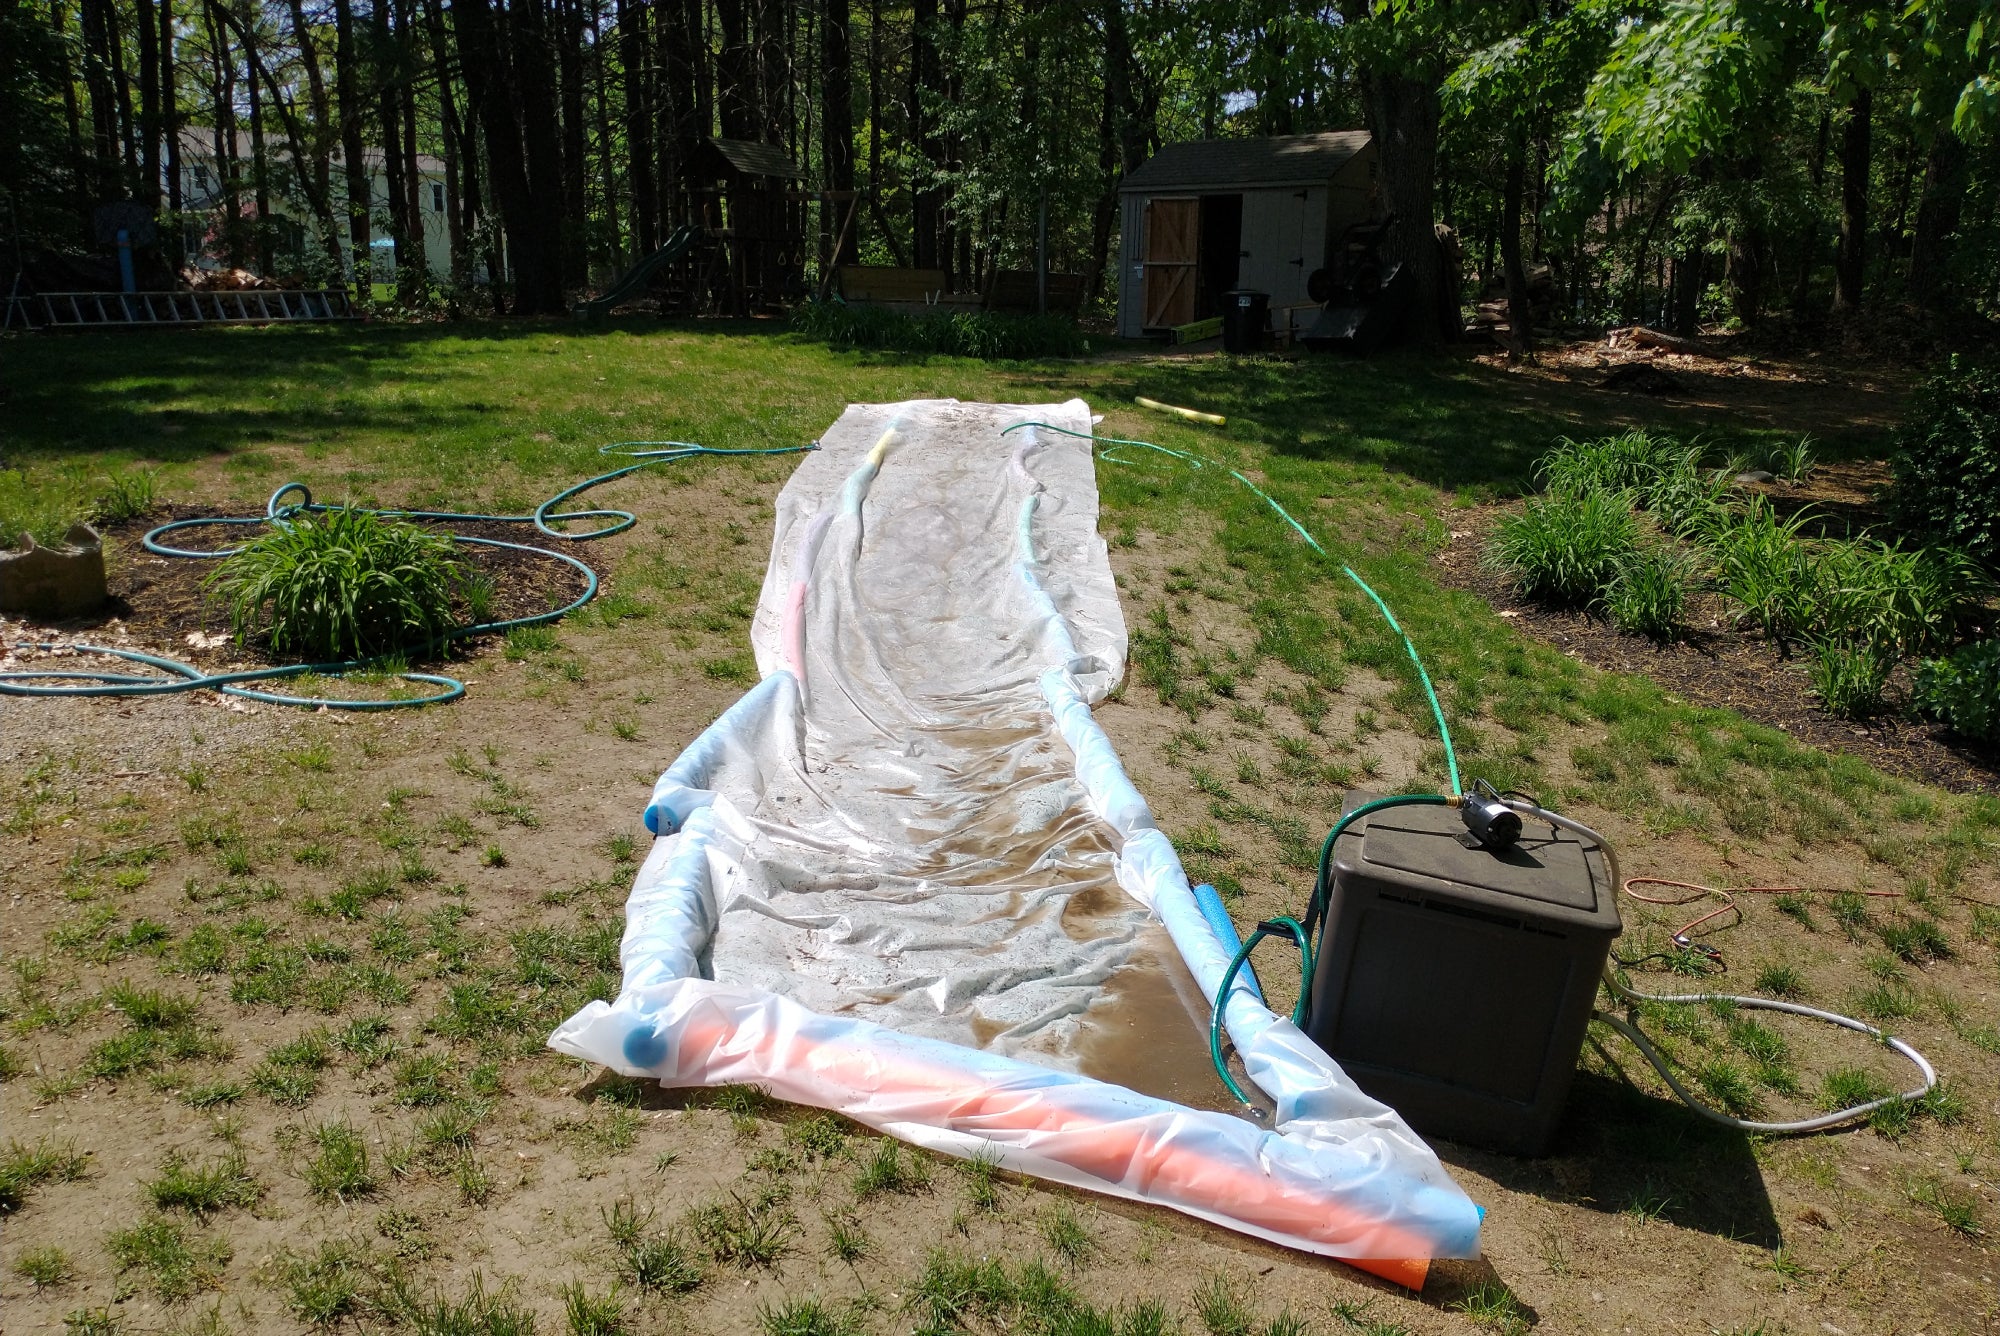 A DIY slip and slide in a yard, with a pump and hose to recycle the water.